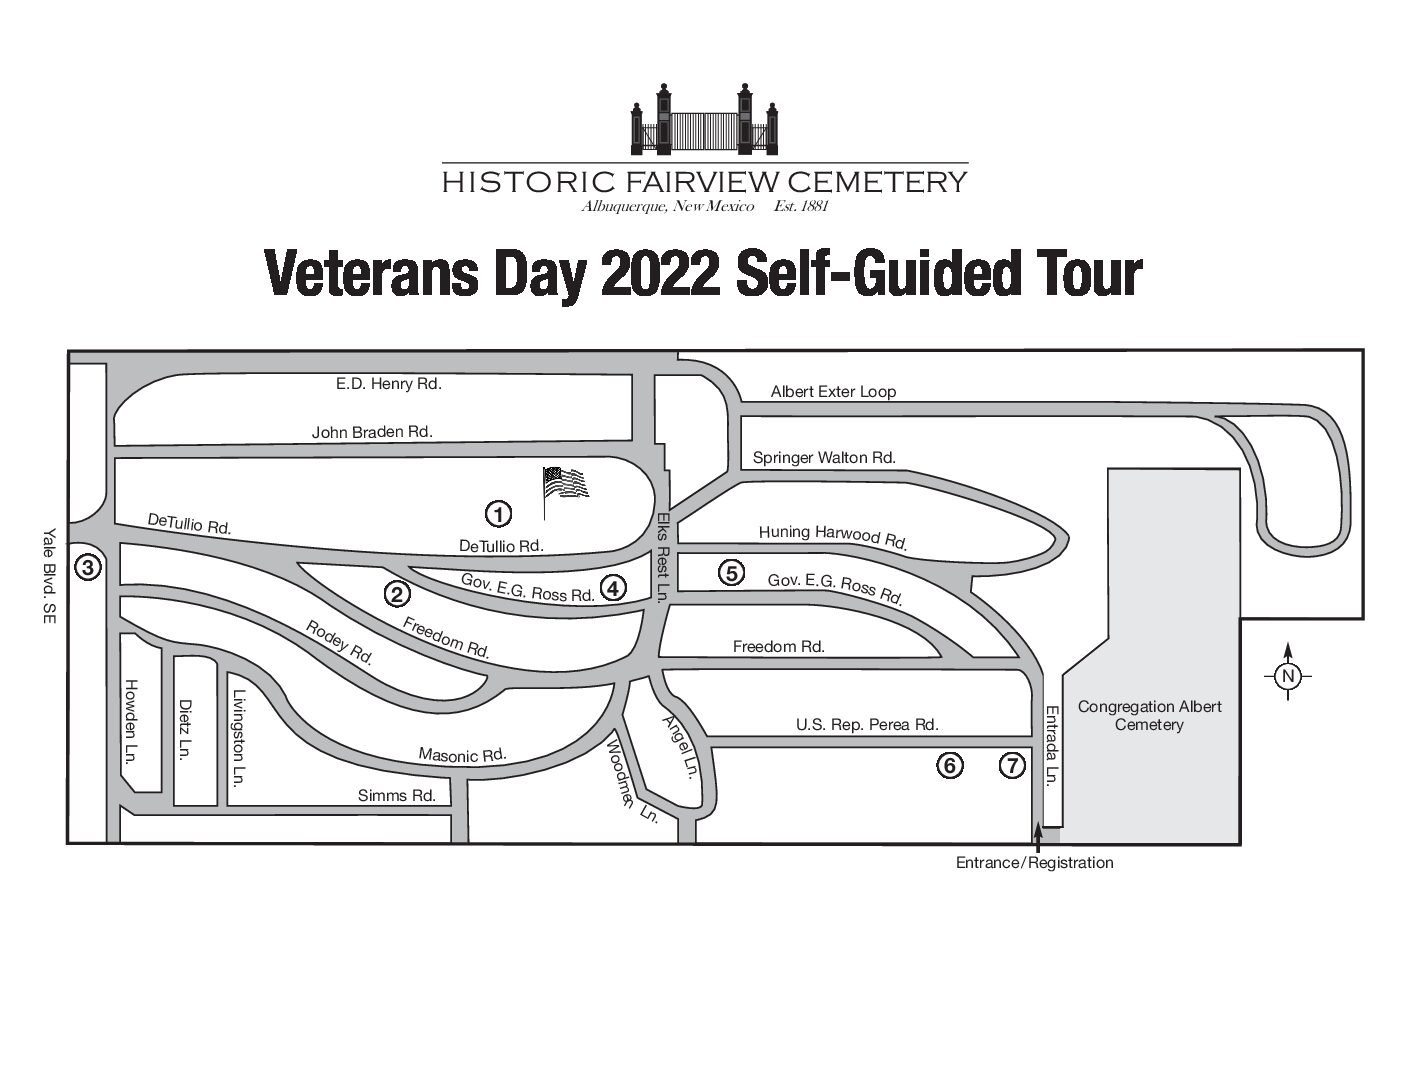 Veterans Day Self-Guided Tour at Historic Fairview Cemetery